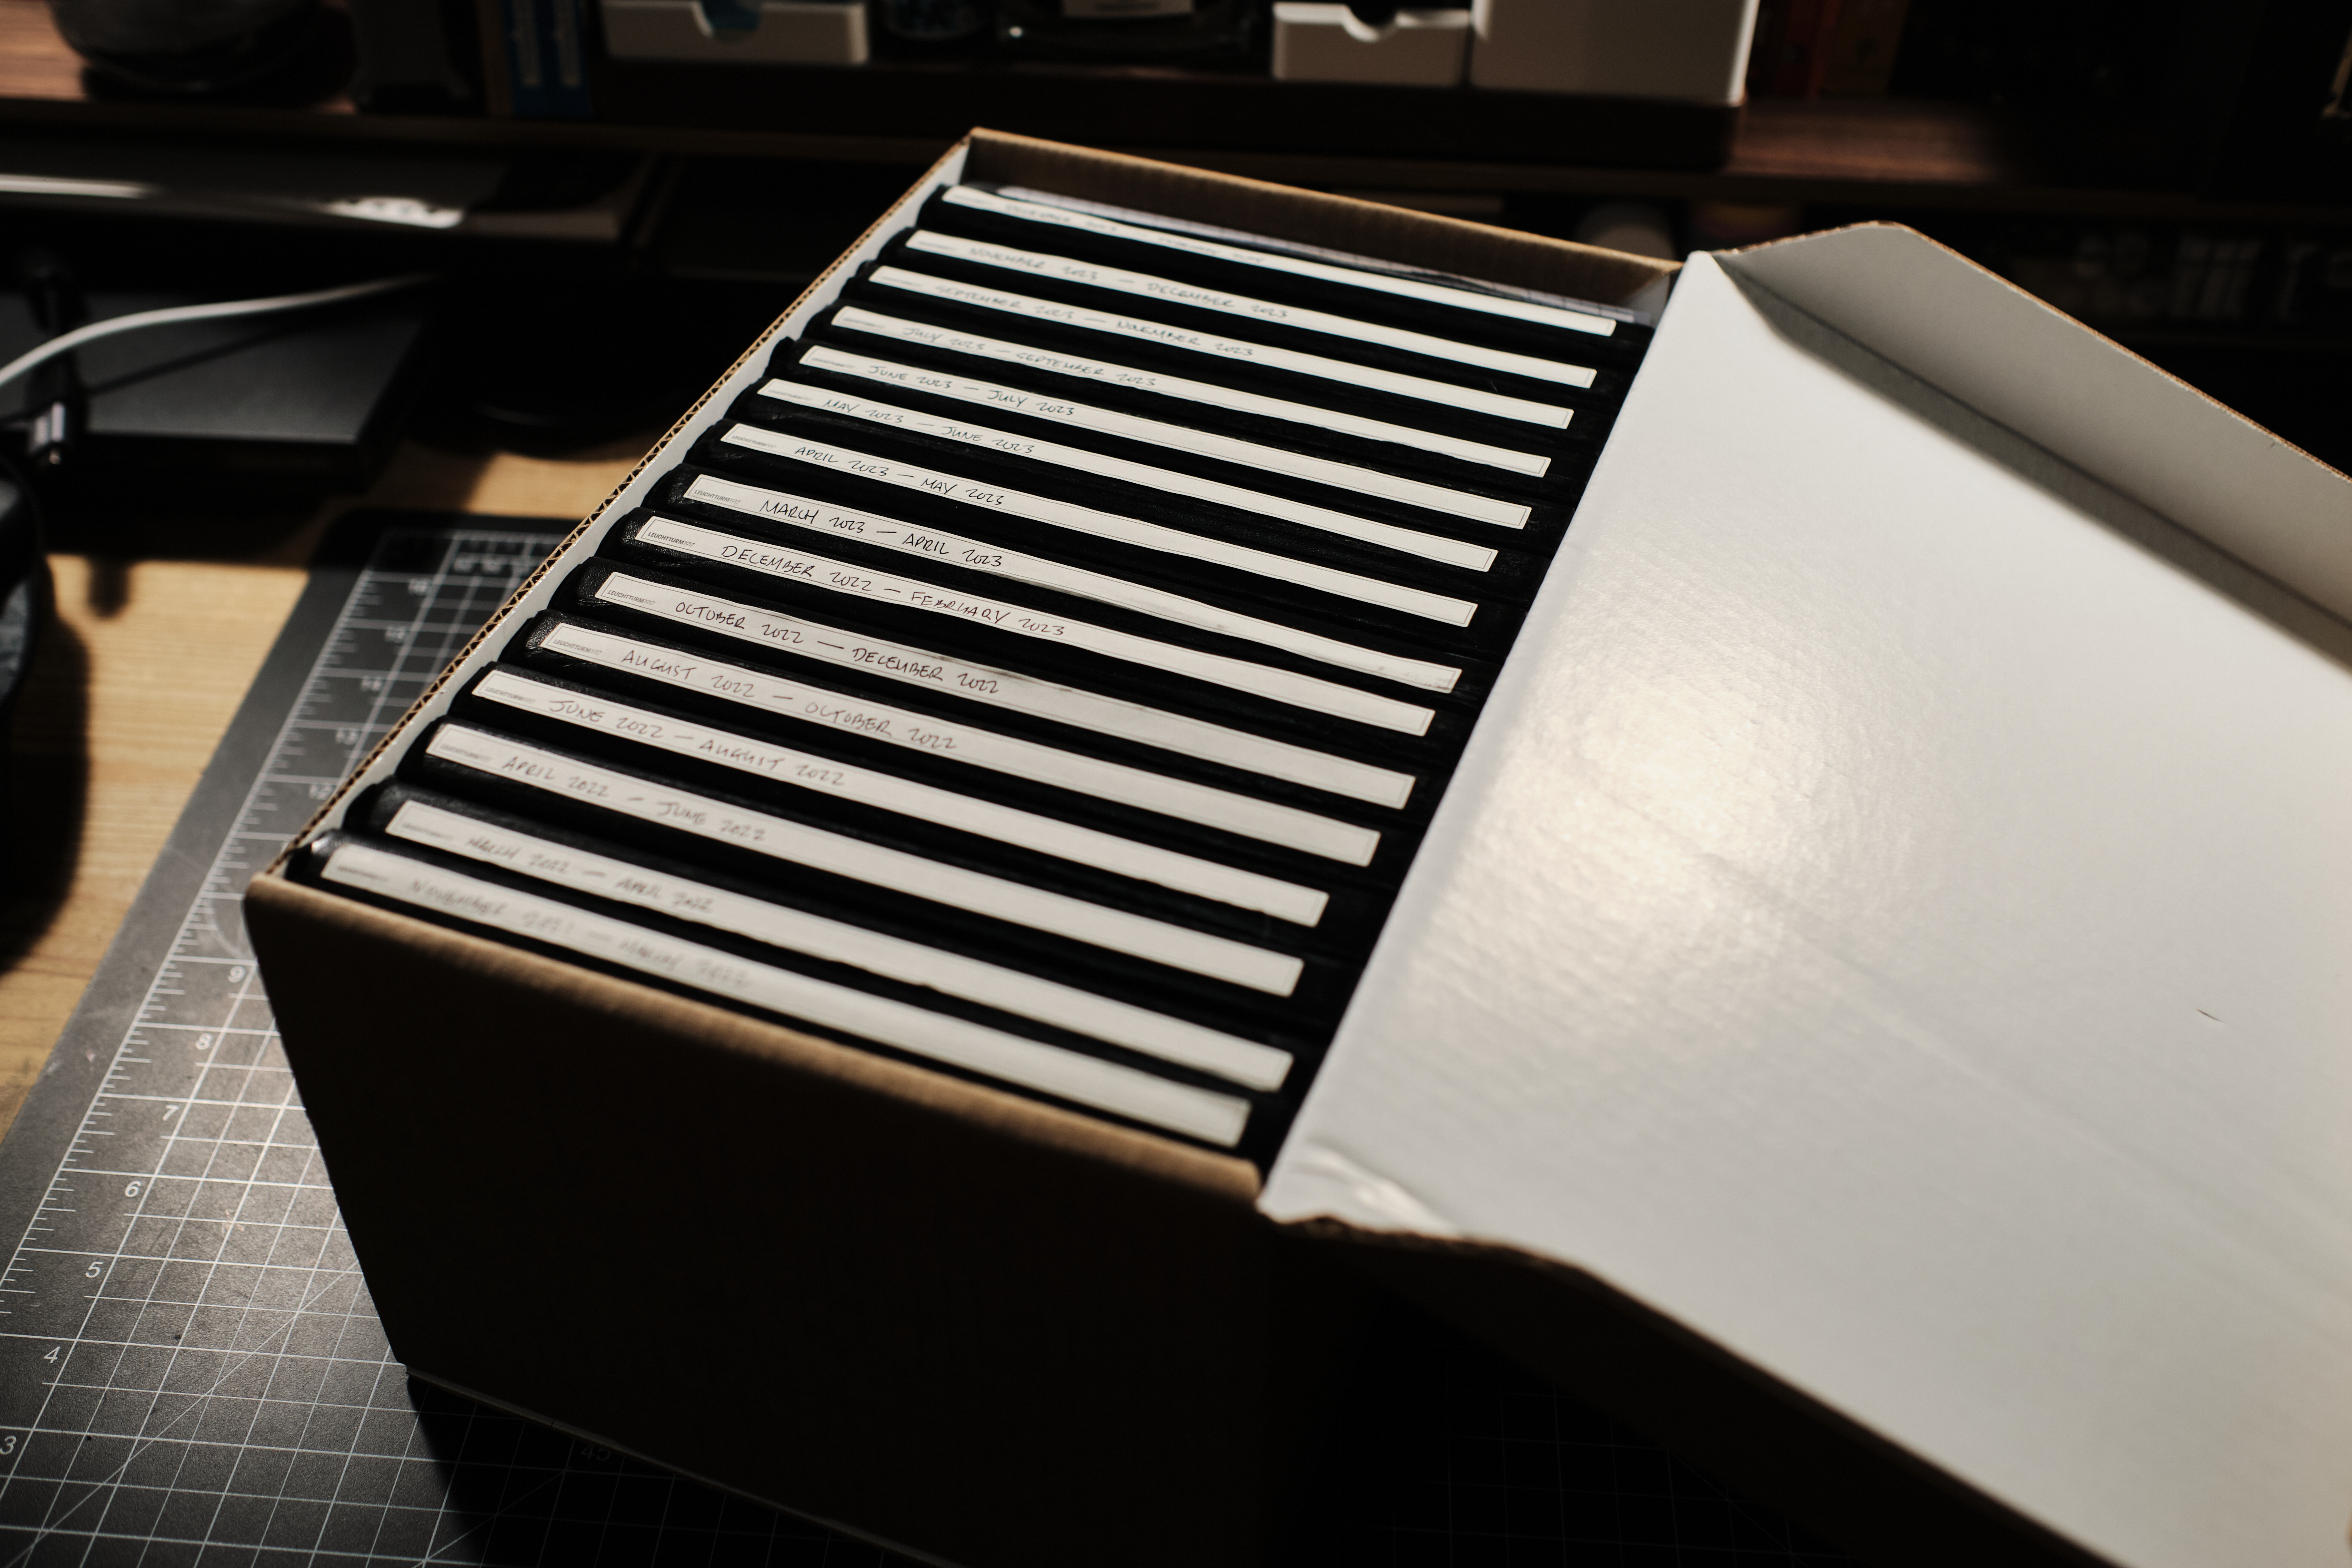 A custom cardboard wooden box with 15 completed Leuchtturm1917 notebooks organized inside, a white label across each spine with the start and end dates of each notebook